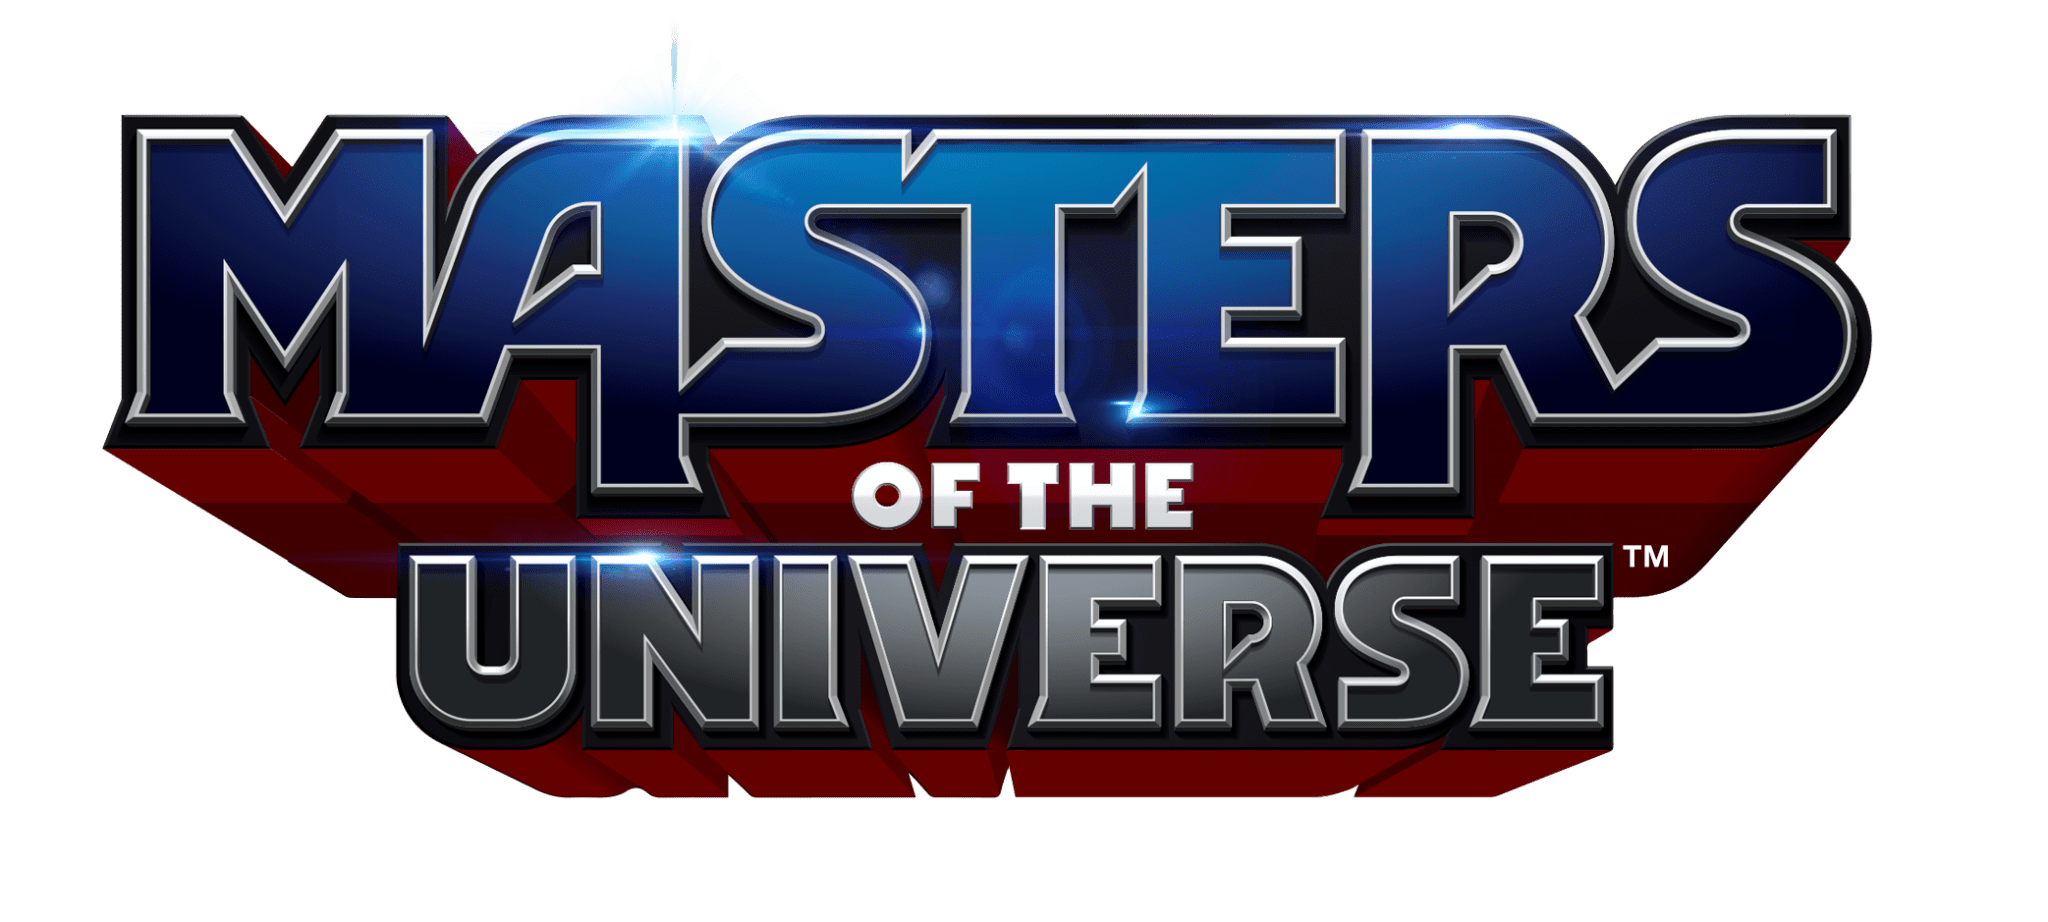 Master's of the Universe logo